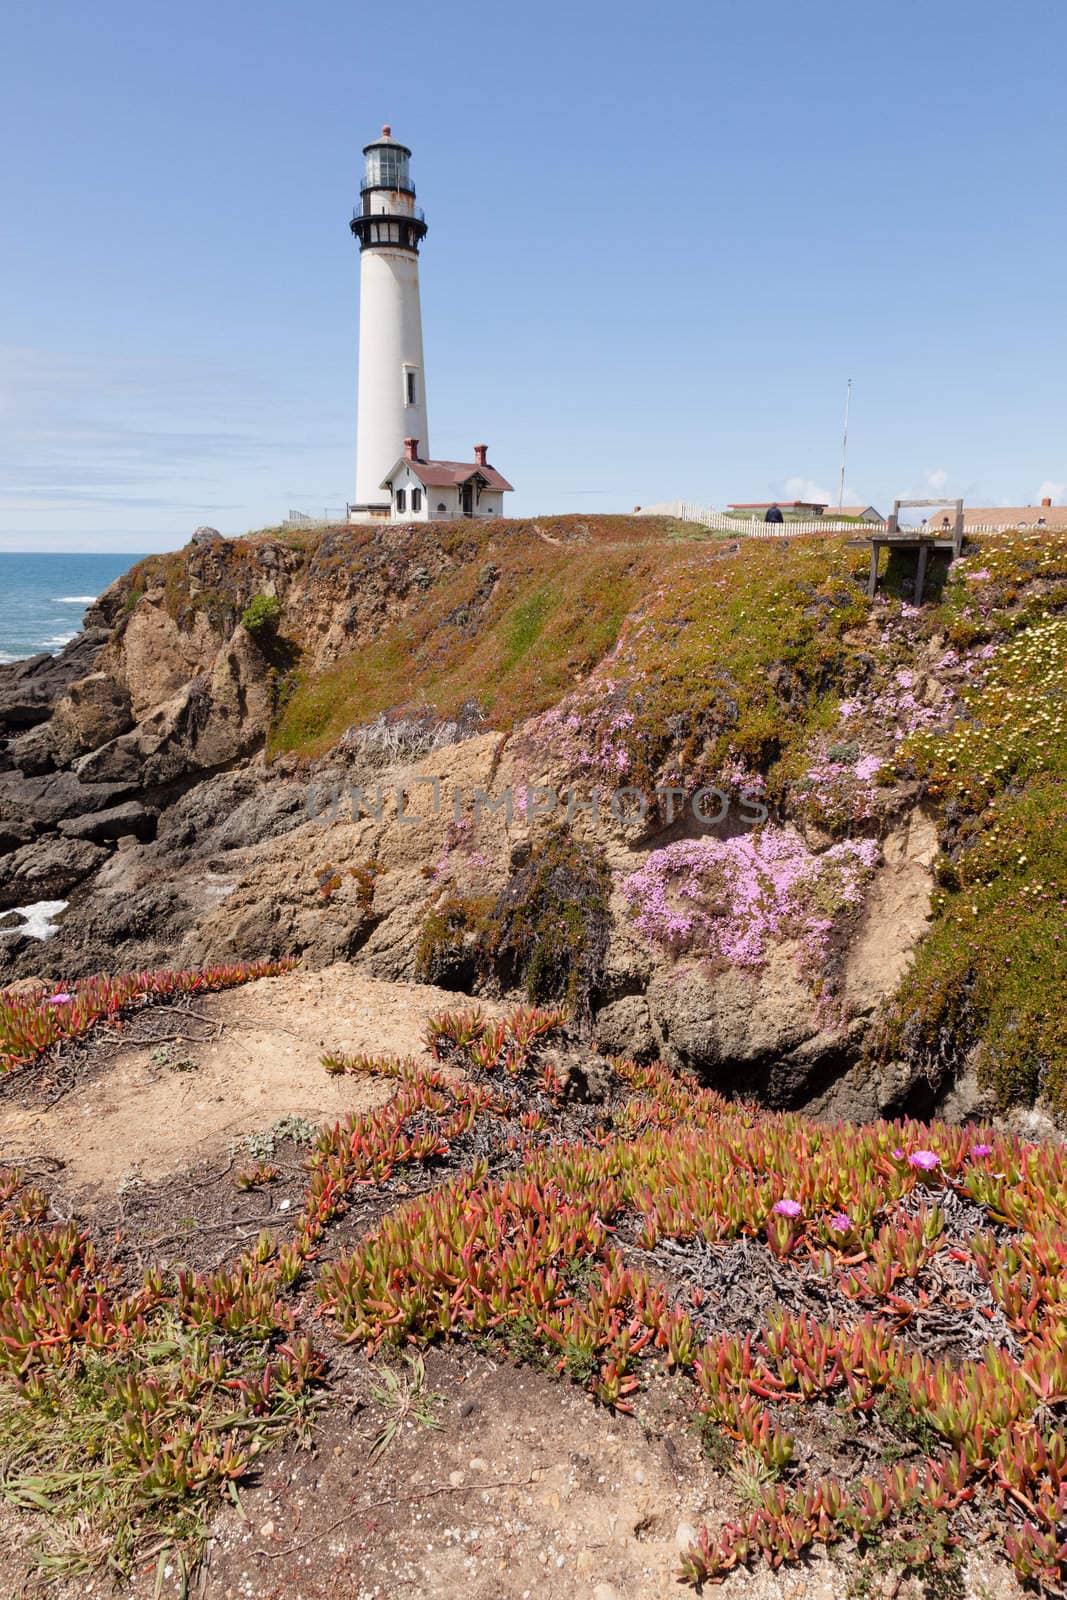 Pigeon Point Lighthouse is a lighthouse built in 1871 to guide ships on the Pacific coast of California.